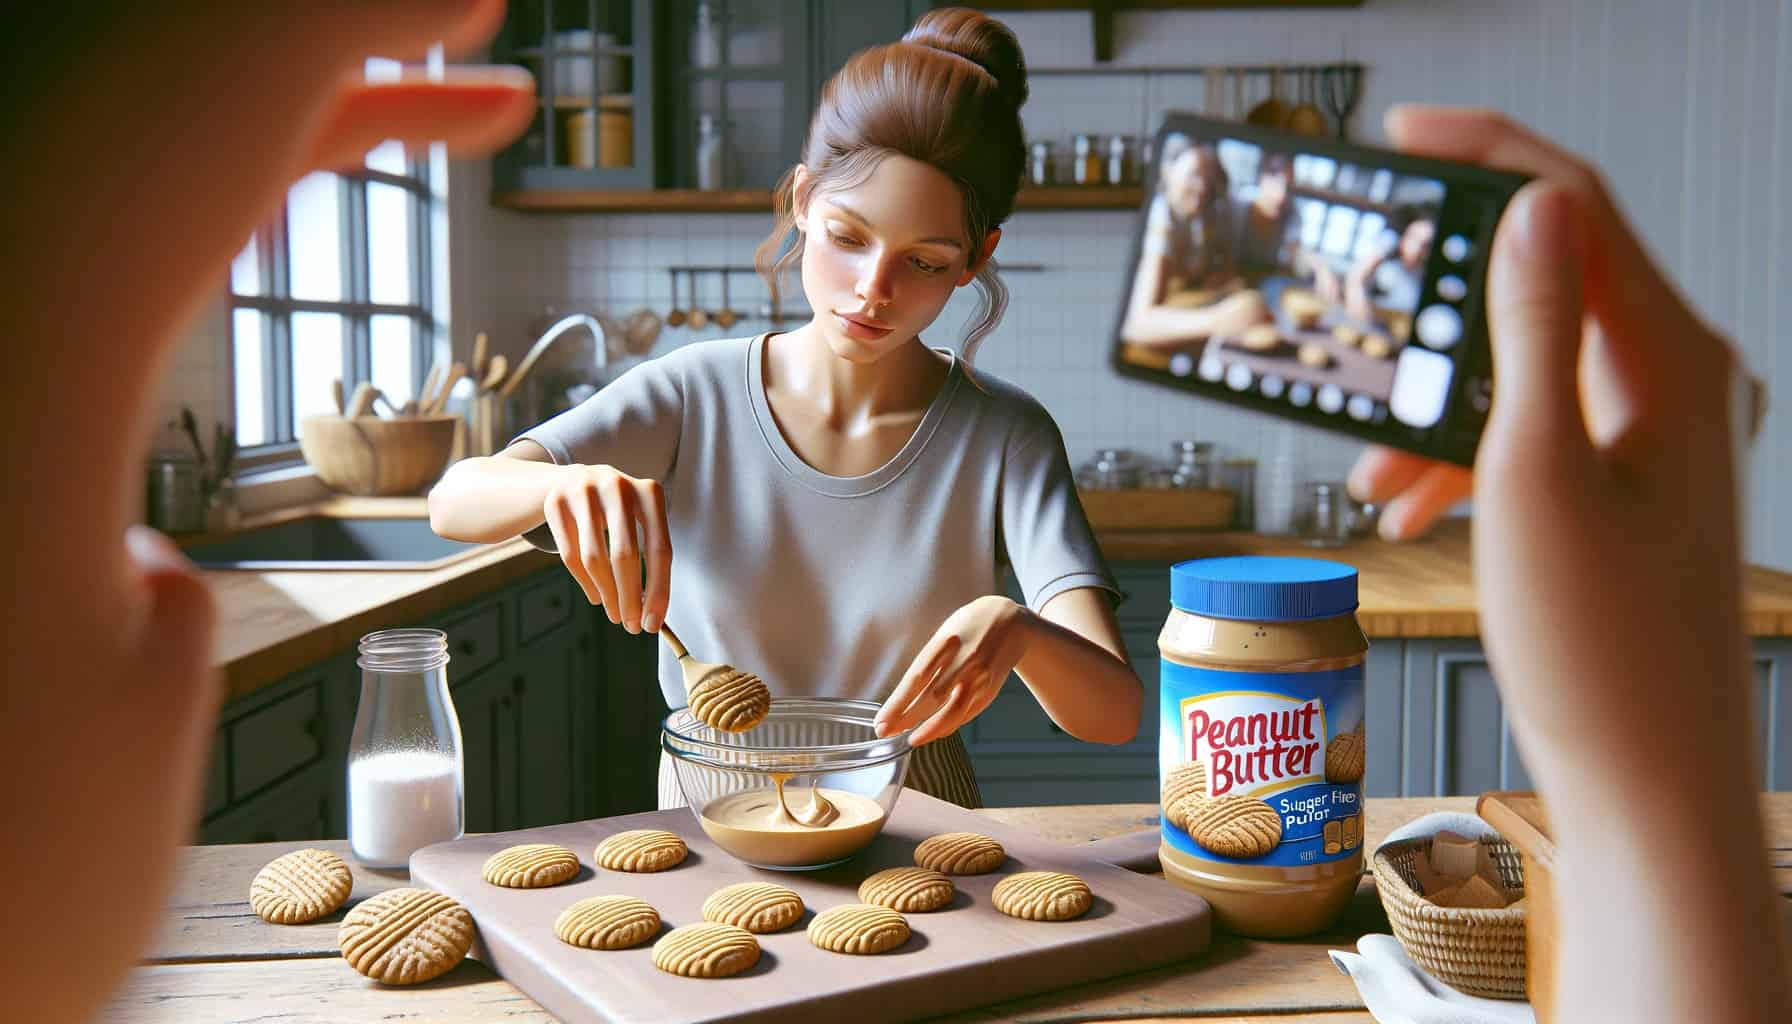 A woman making sugar free peanut butter cookies in a kitchen.